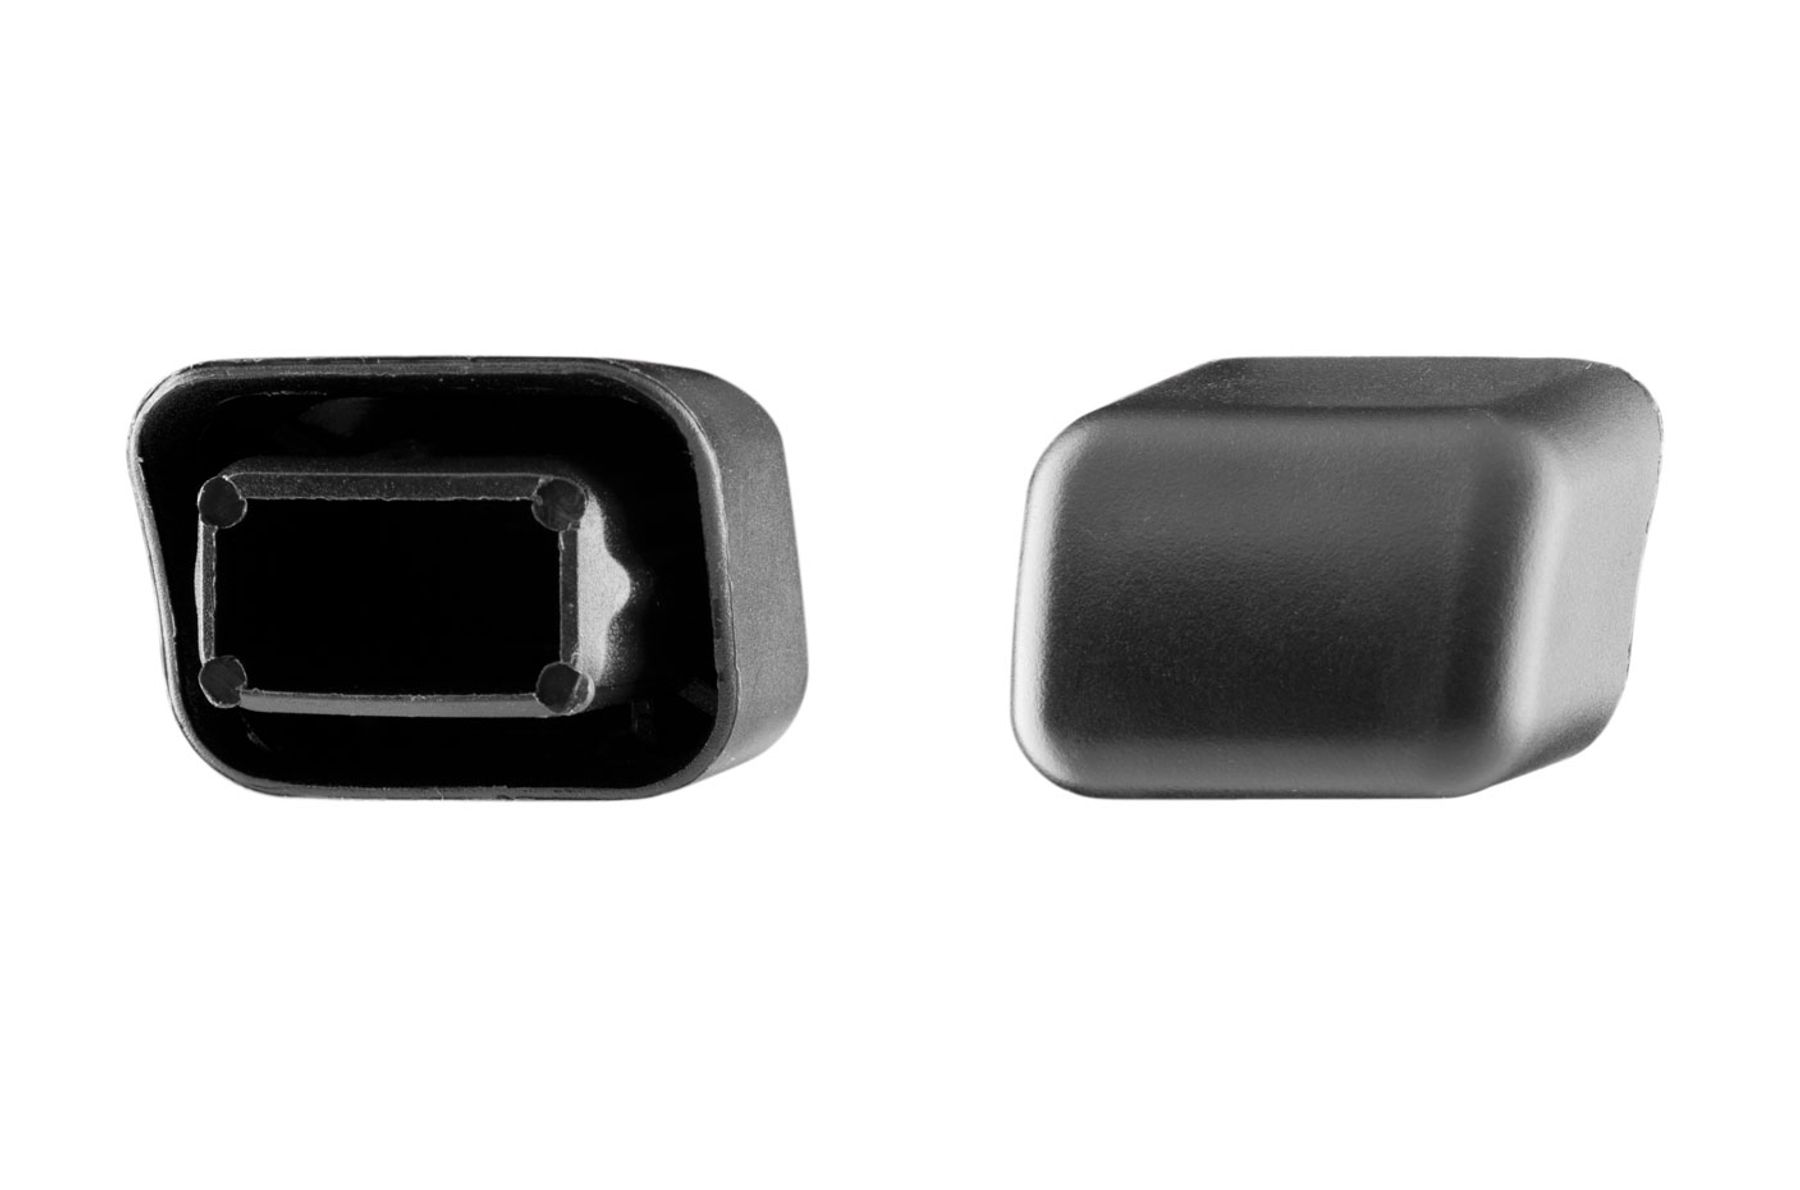 Thule Square Bar Spare End Caps x 4 NEW 52968 Replacing 30661